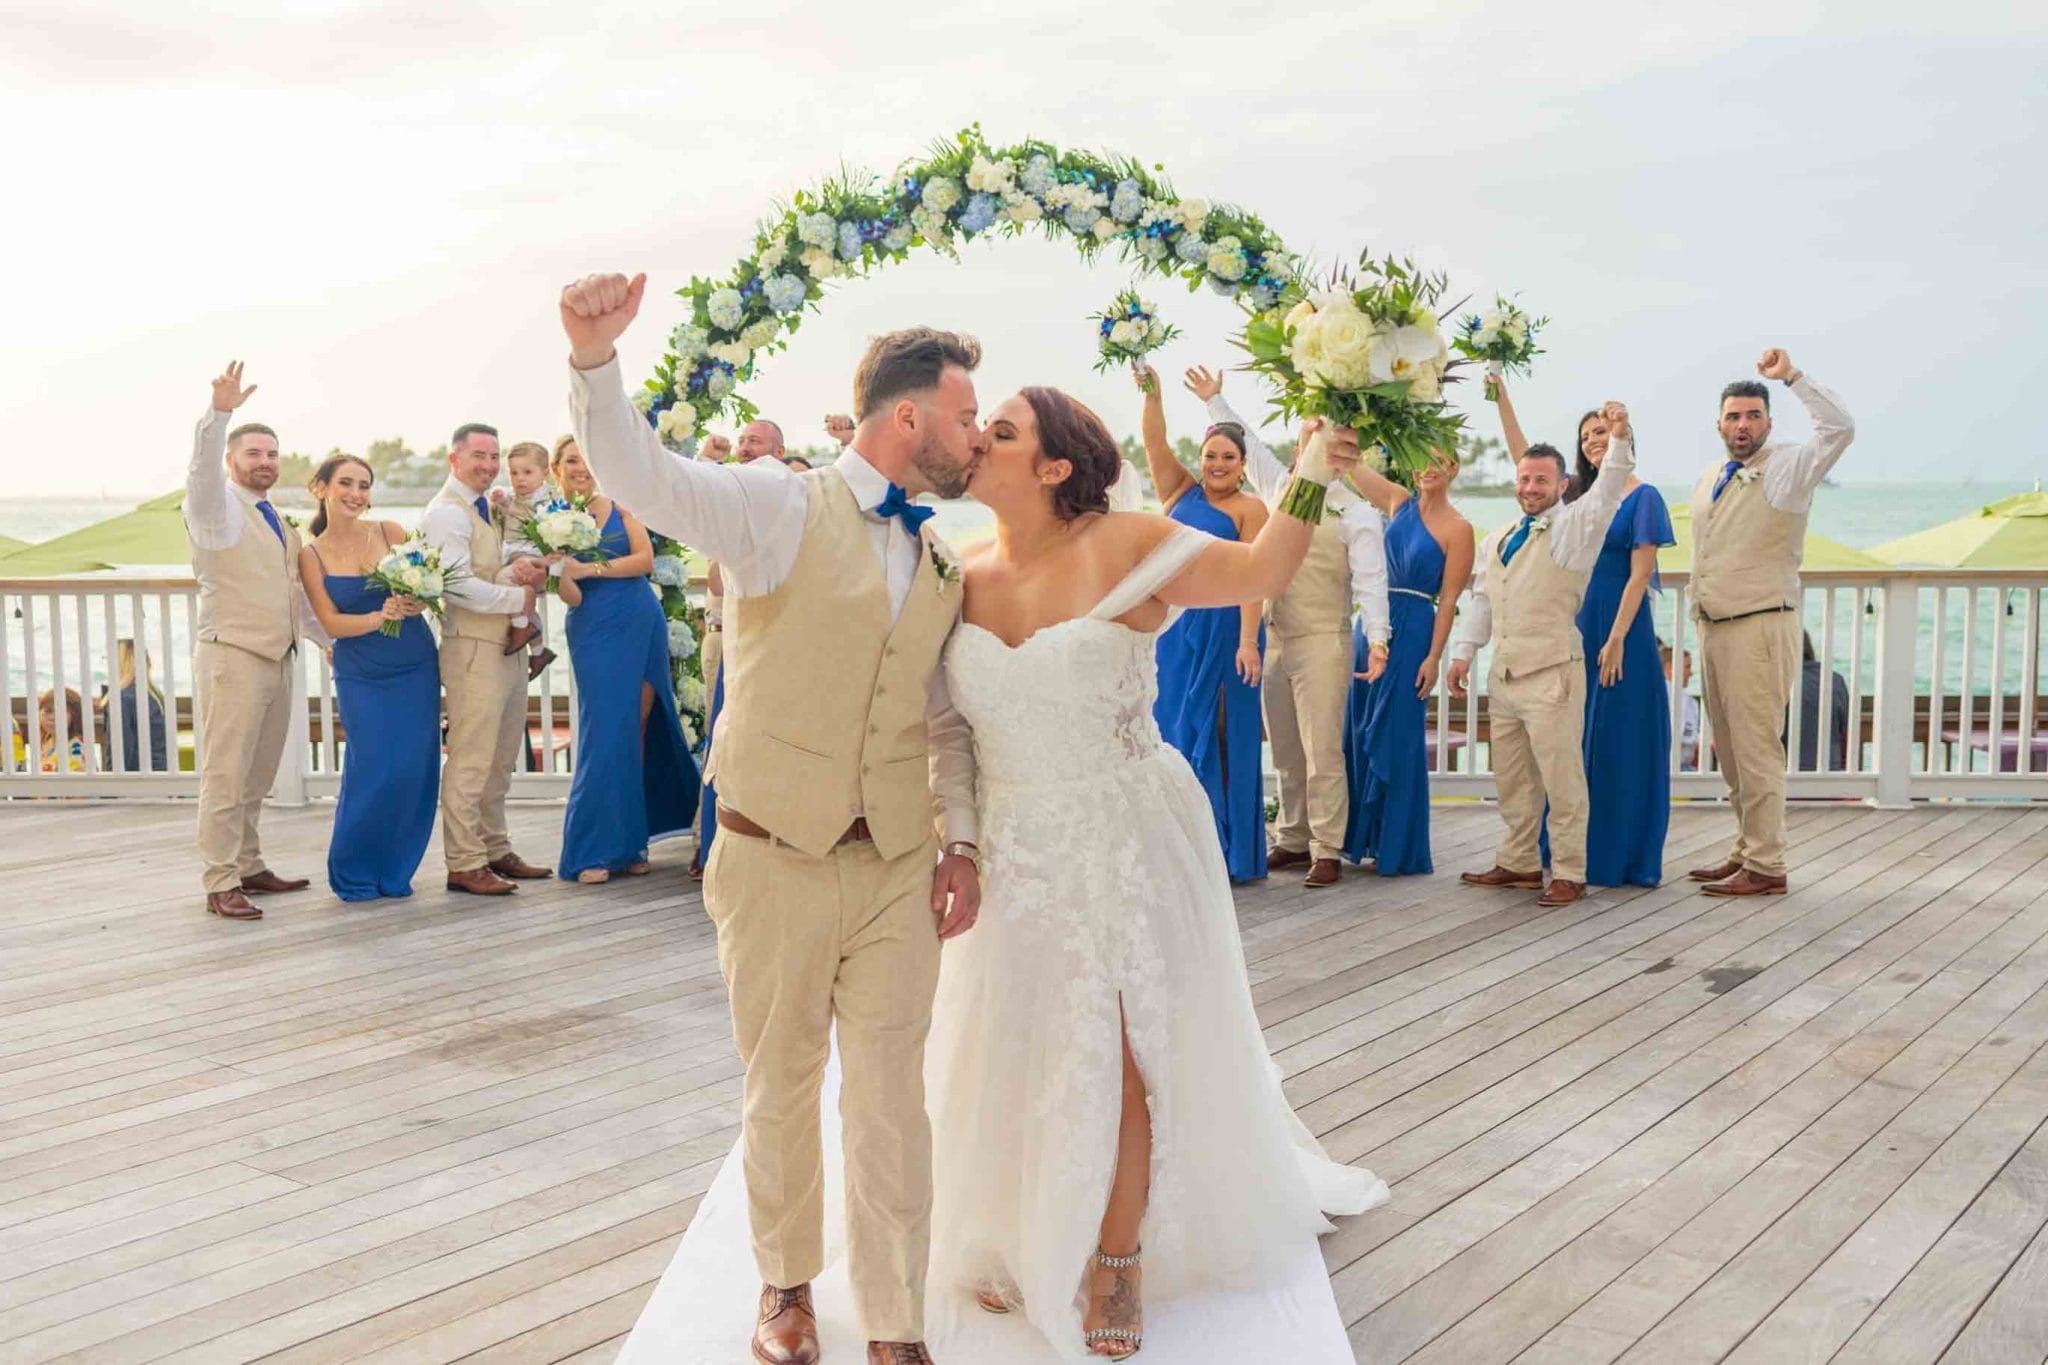 A bride and groom kiss on a wooden pier with their wedding party, wearing blue and beige, cheering behind them under a floral arch.